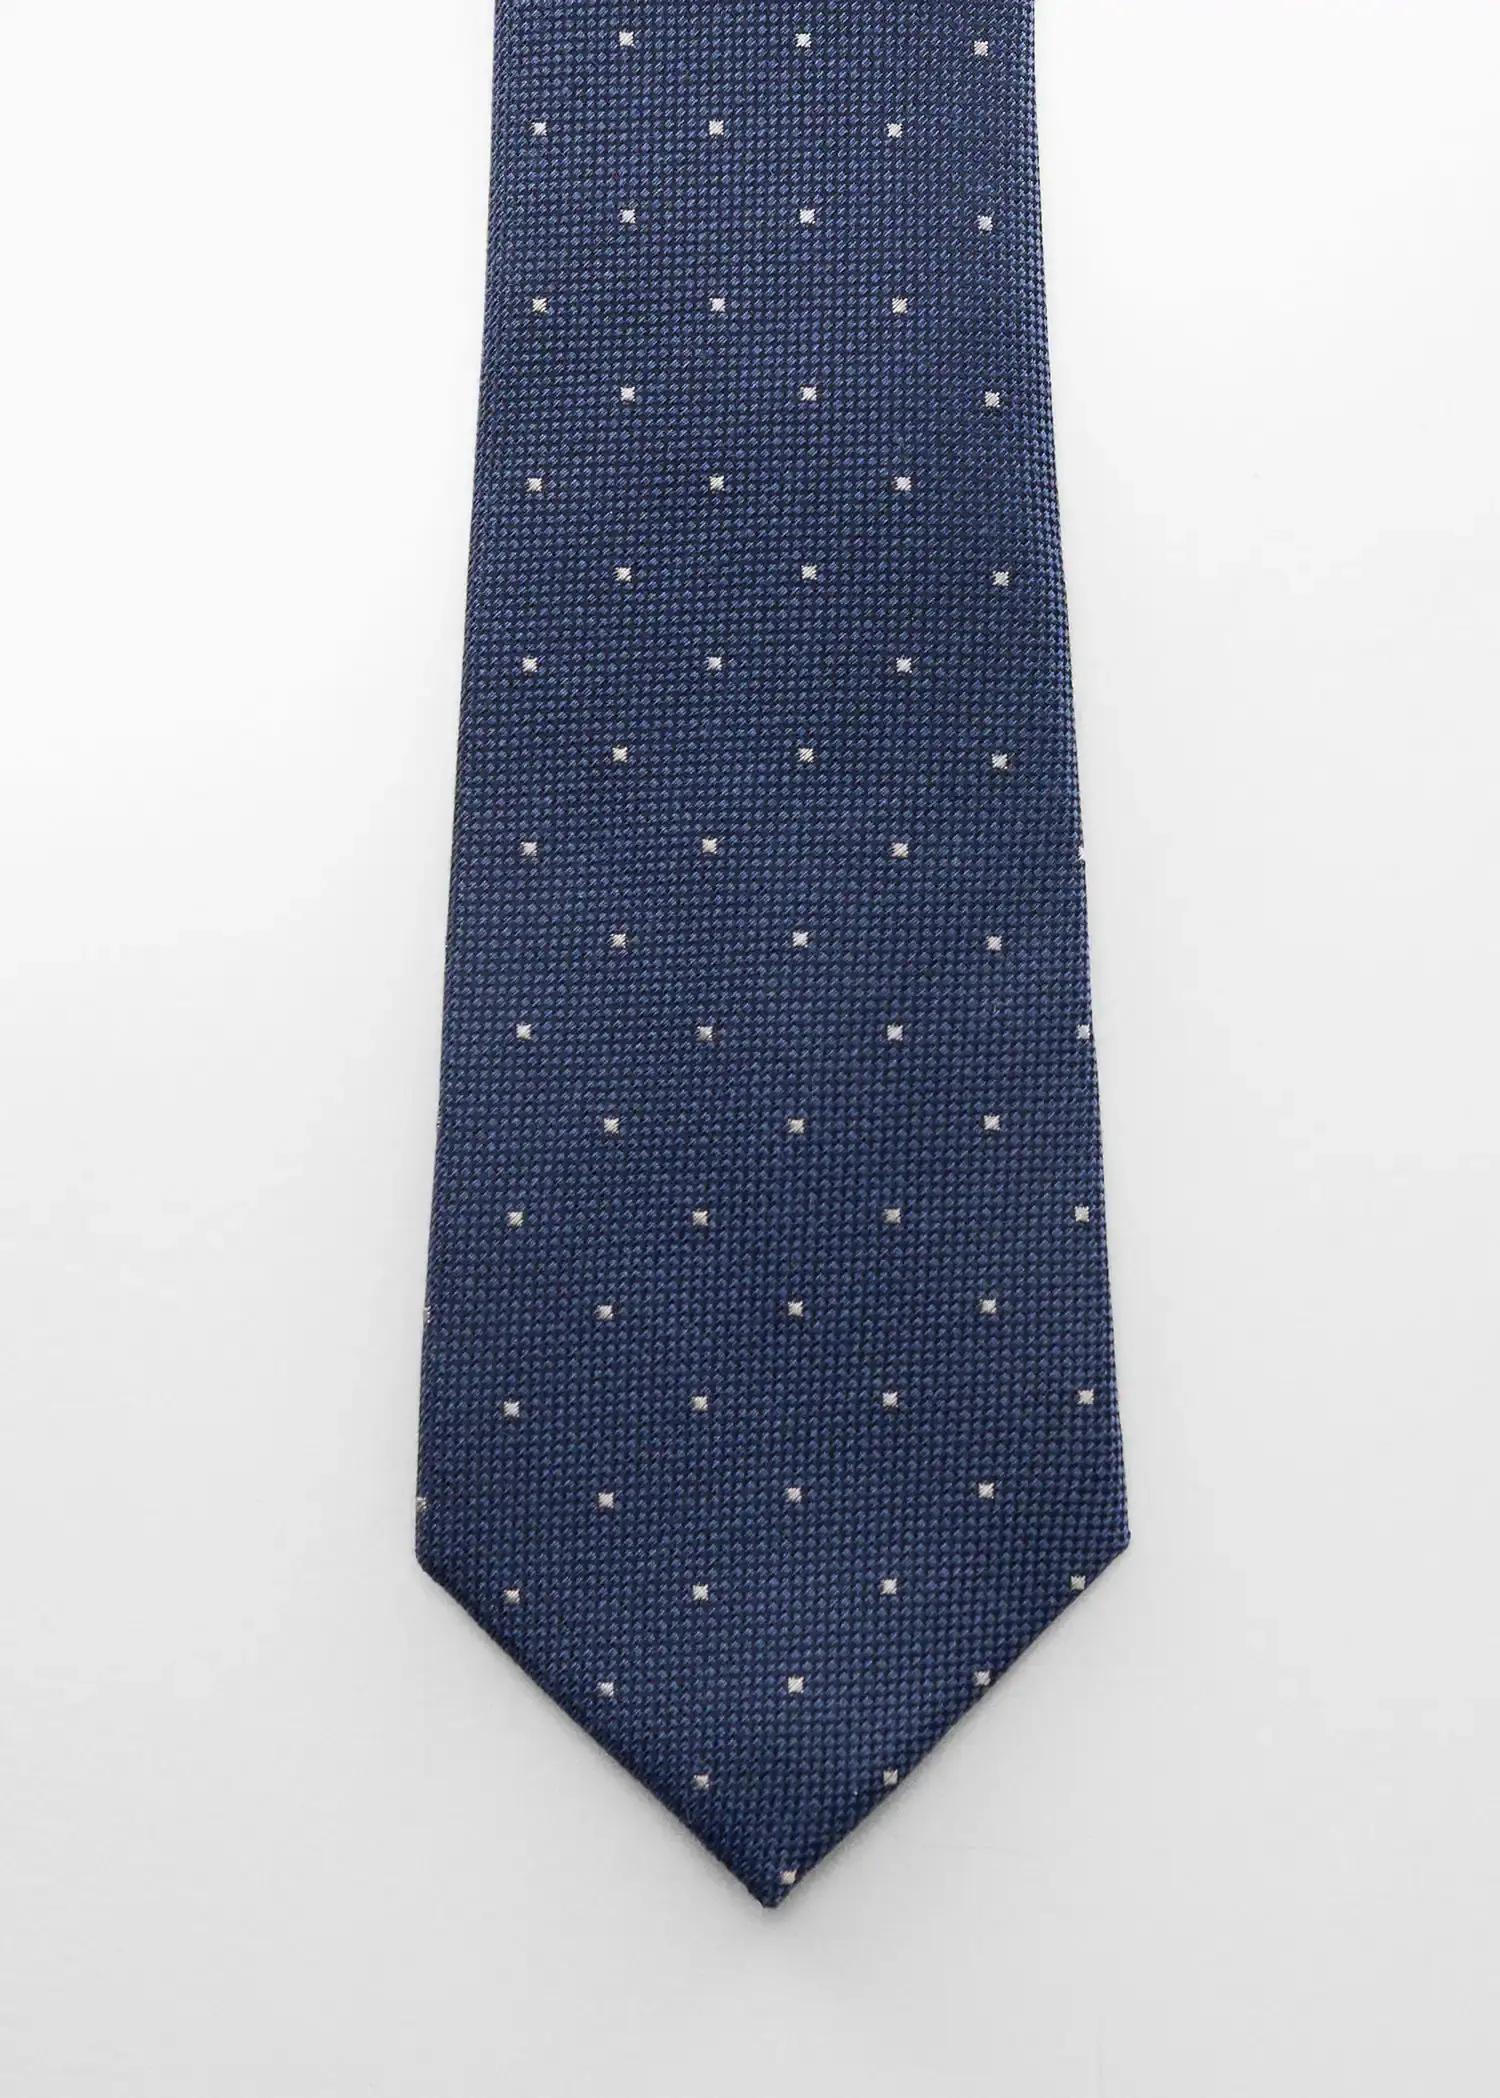 Mango Tie with micro polka-dot structure. a blue tie with white polka dots on it. 